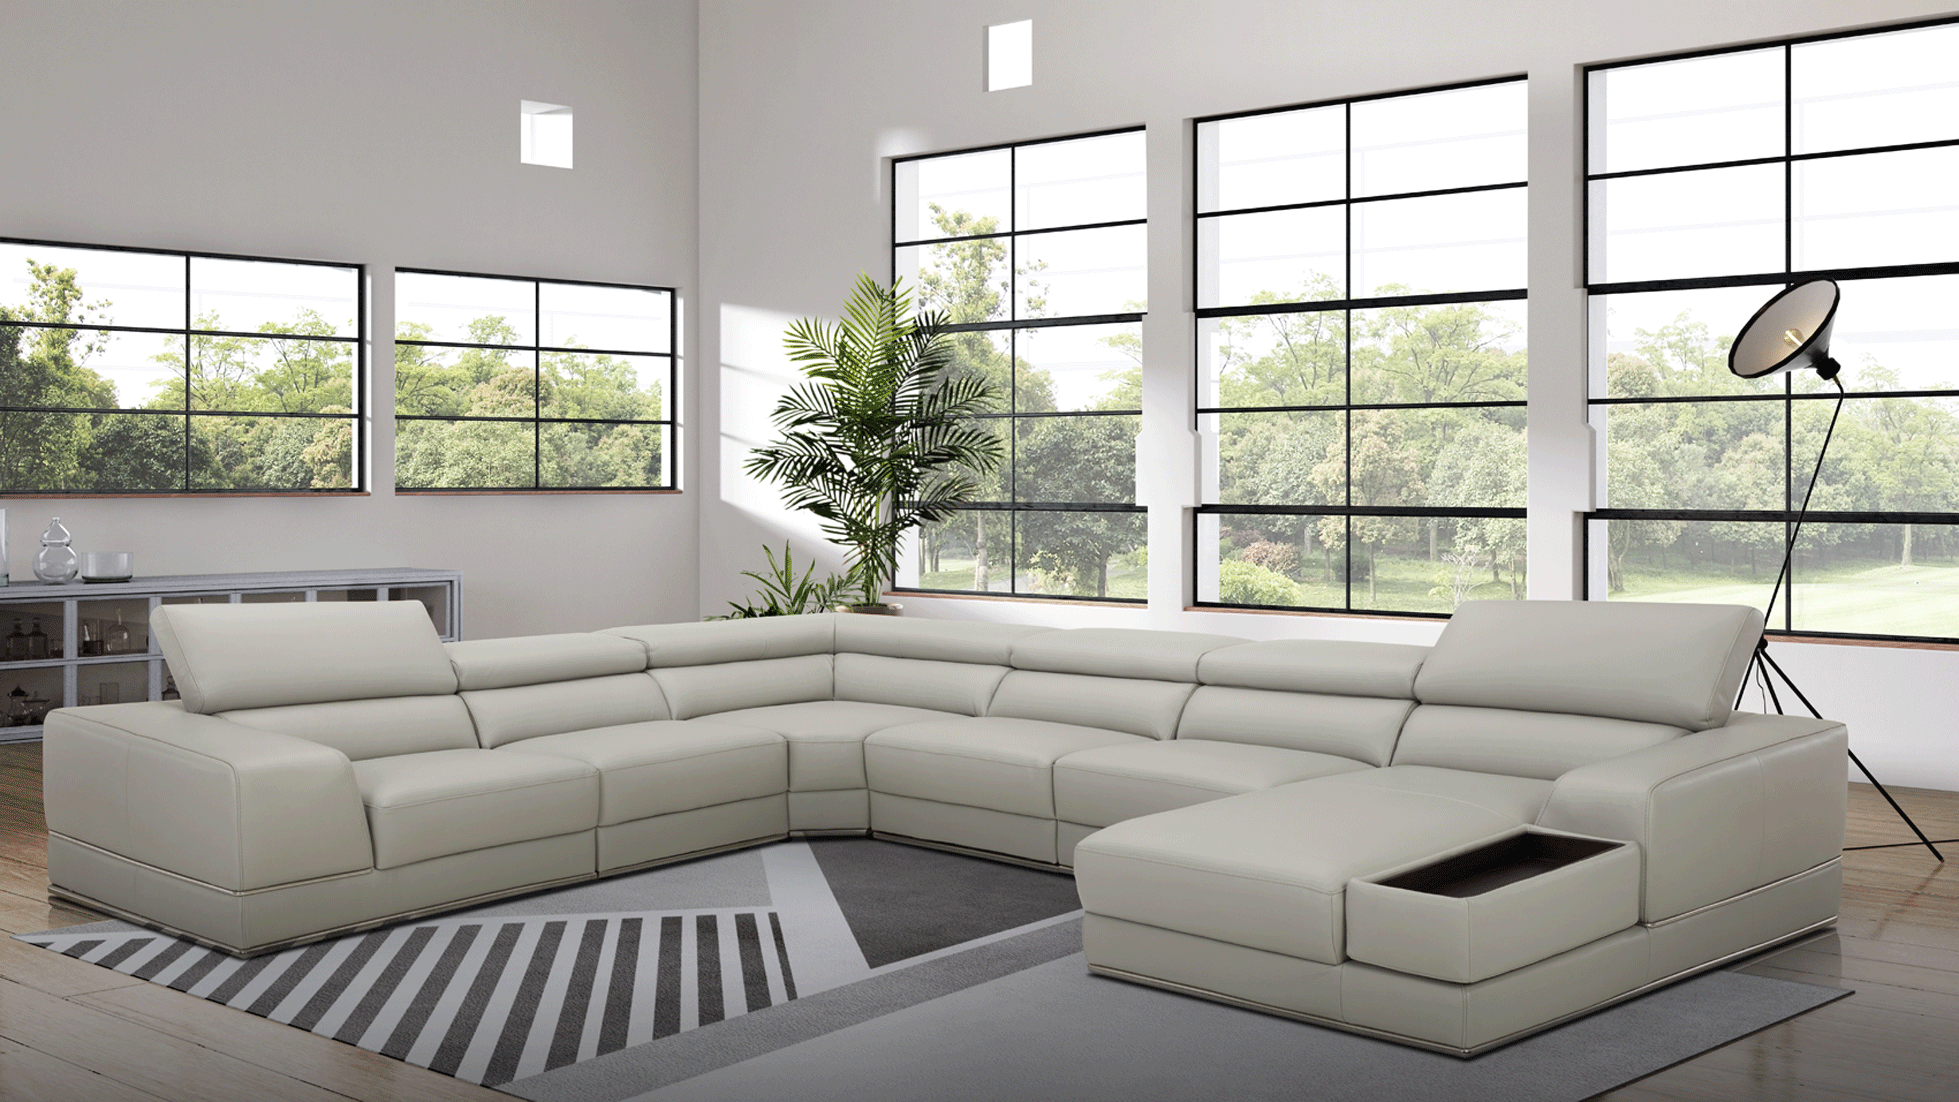 Brands FLR Modern Living Special Order 1576 Sectional Right by Kuka